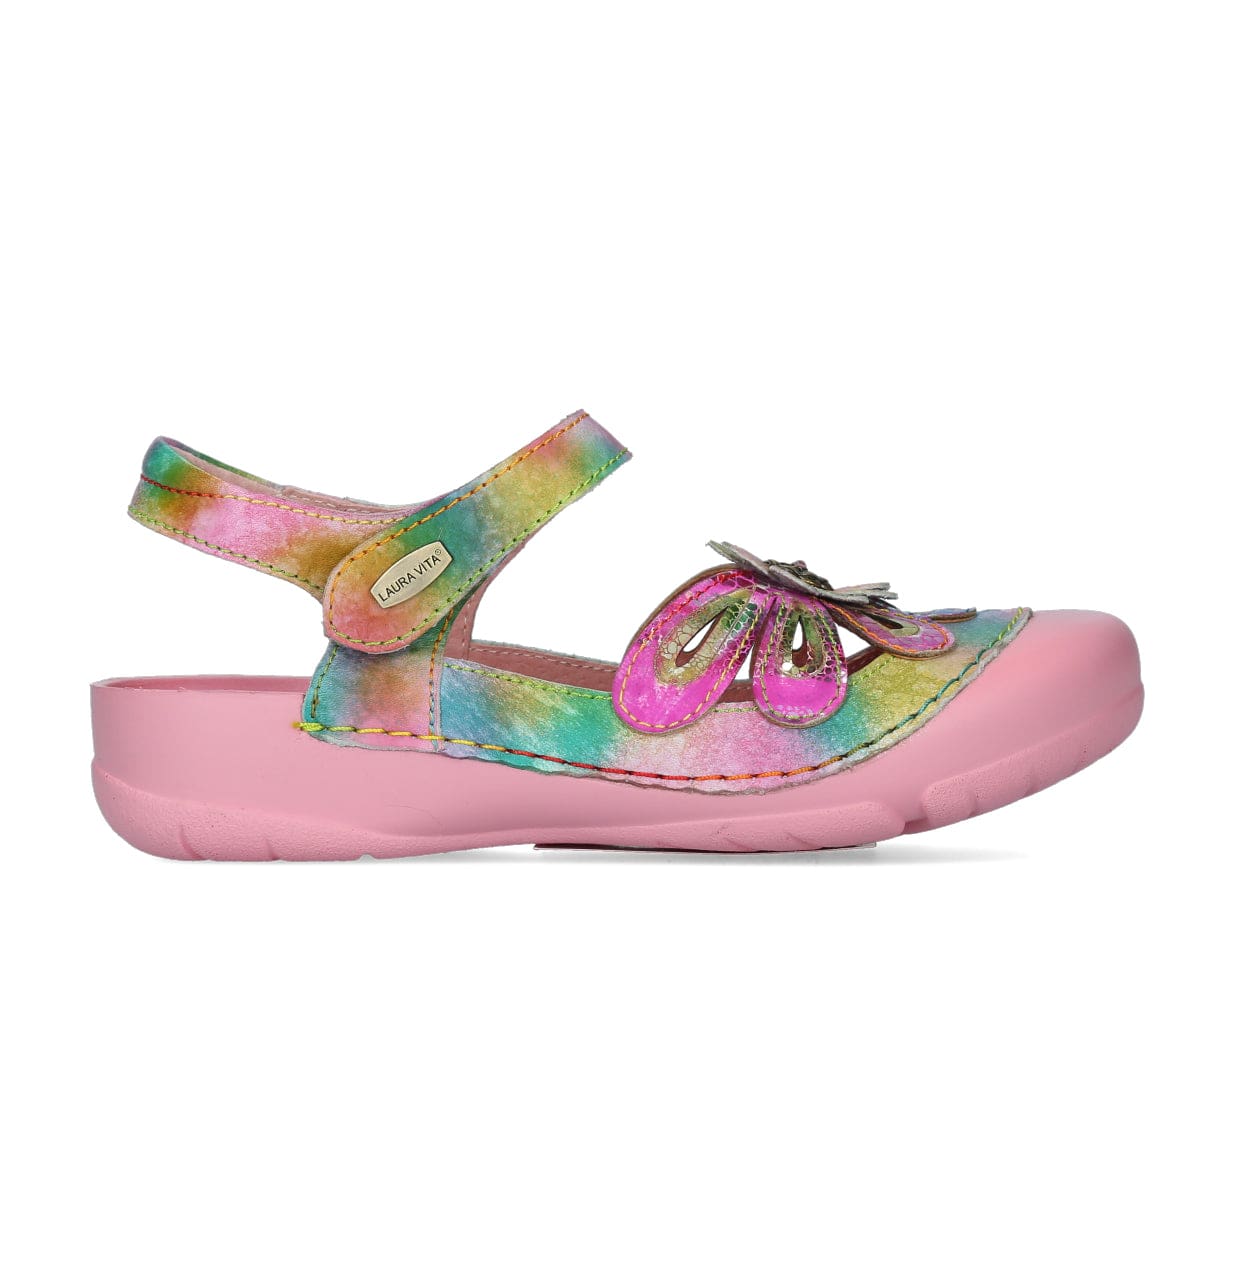 BECZIERSO Shoes 12 - 35 / Pink - Mule